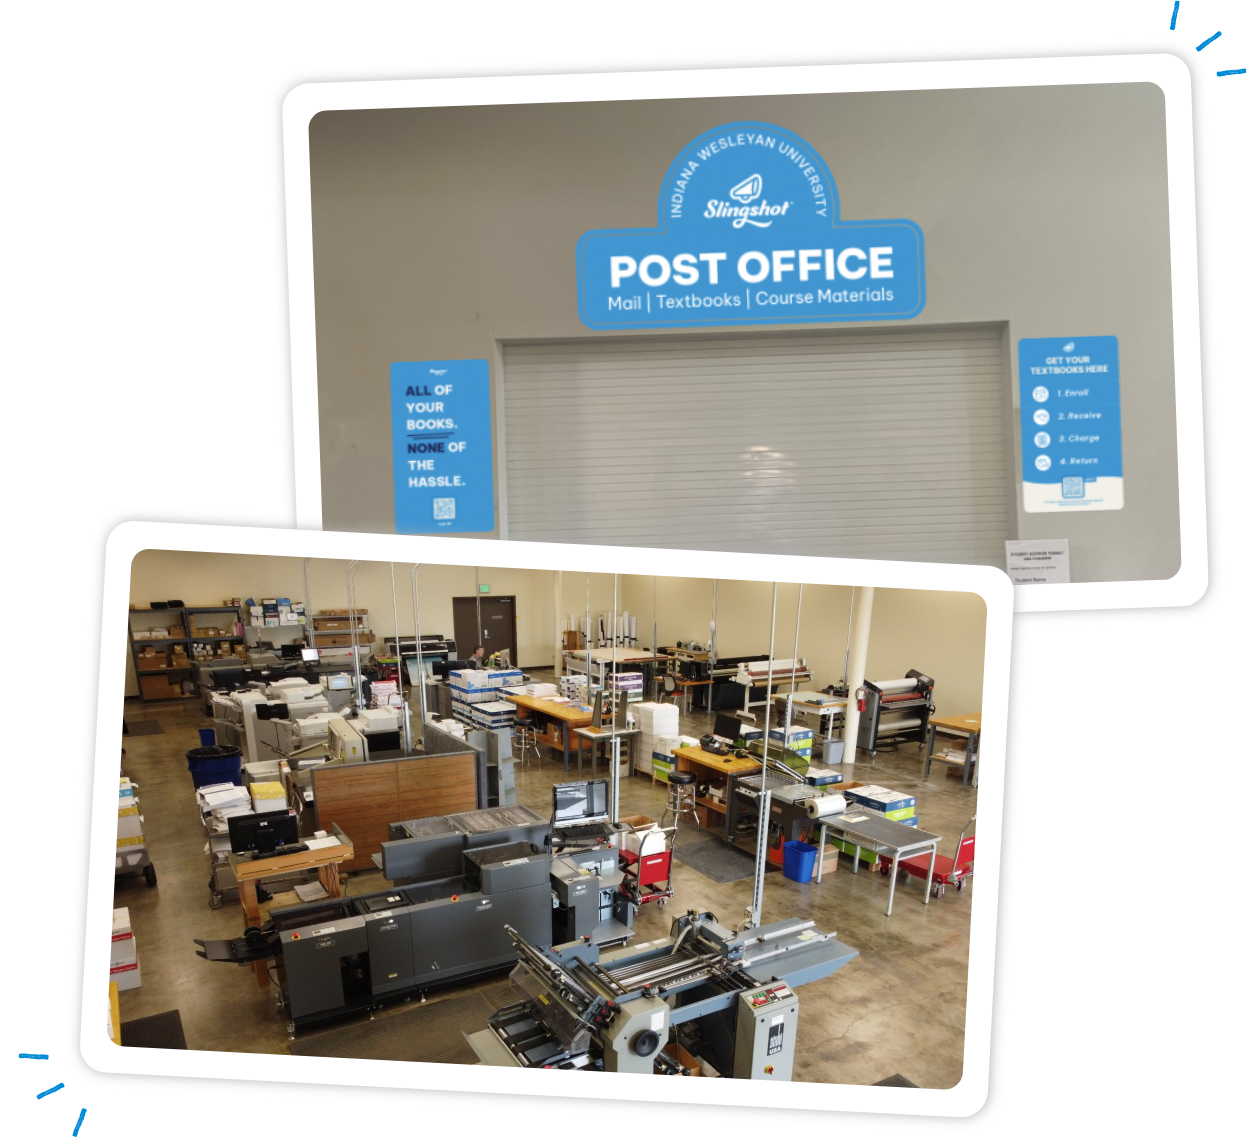 Slingshot Post Office and Corporate Print Shop